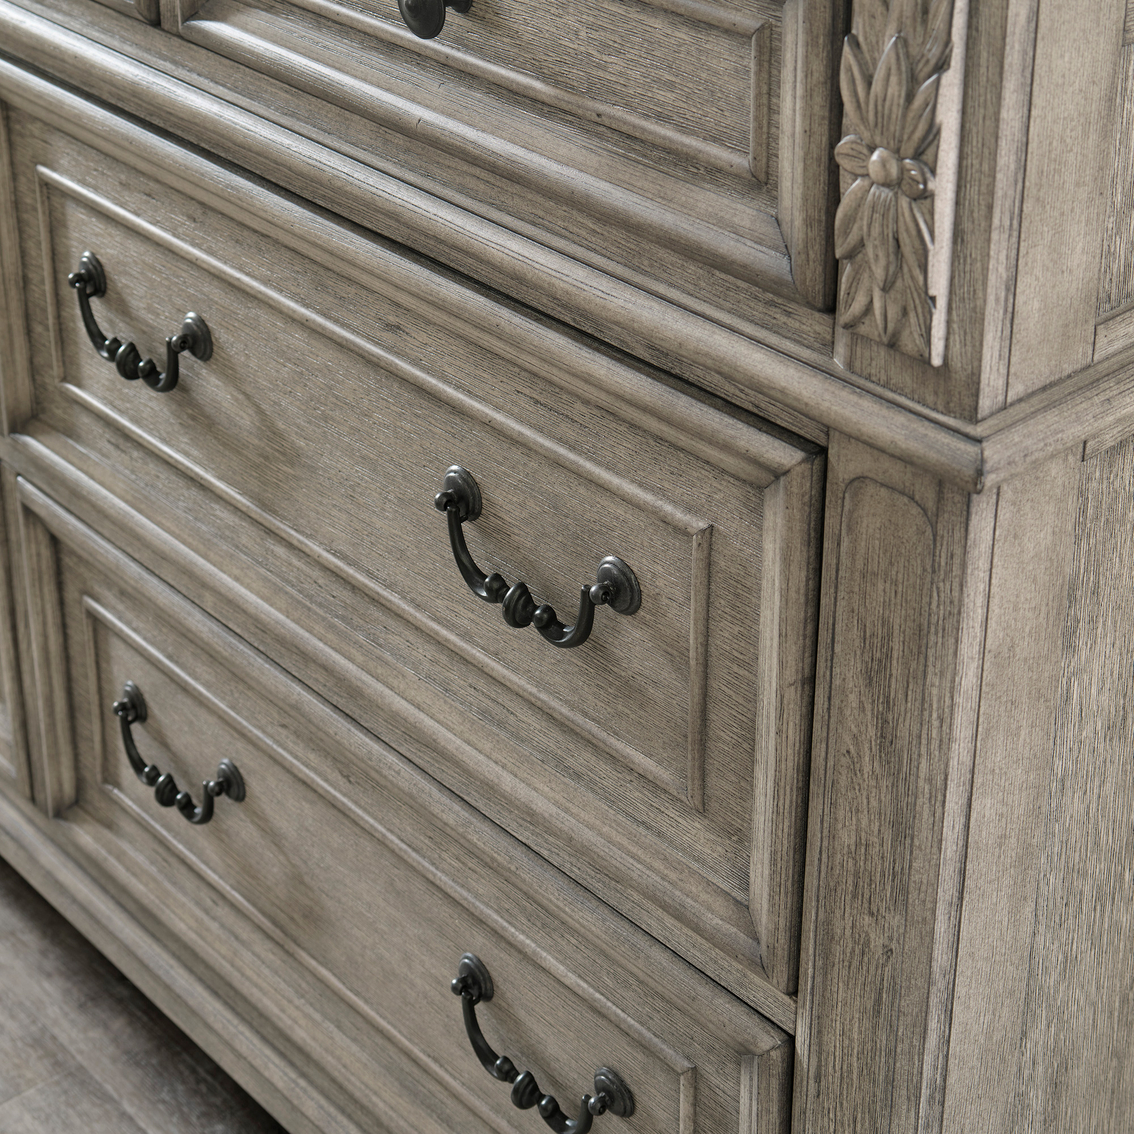 Signature Design by Ashley Bedroom Set 5 pc. - Image 6 of 10